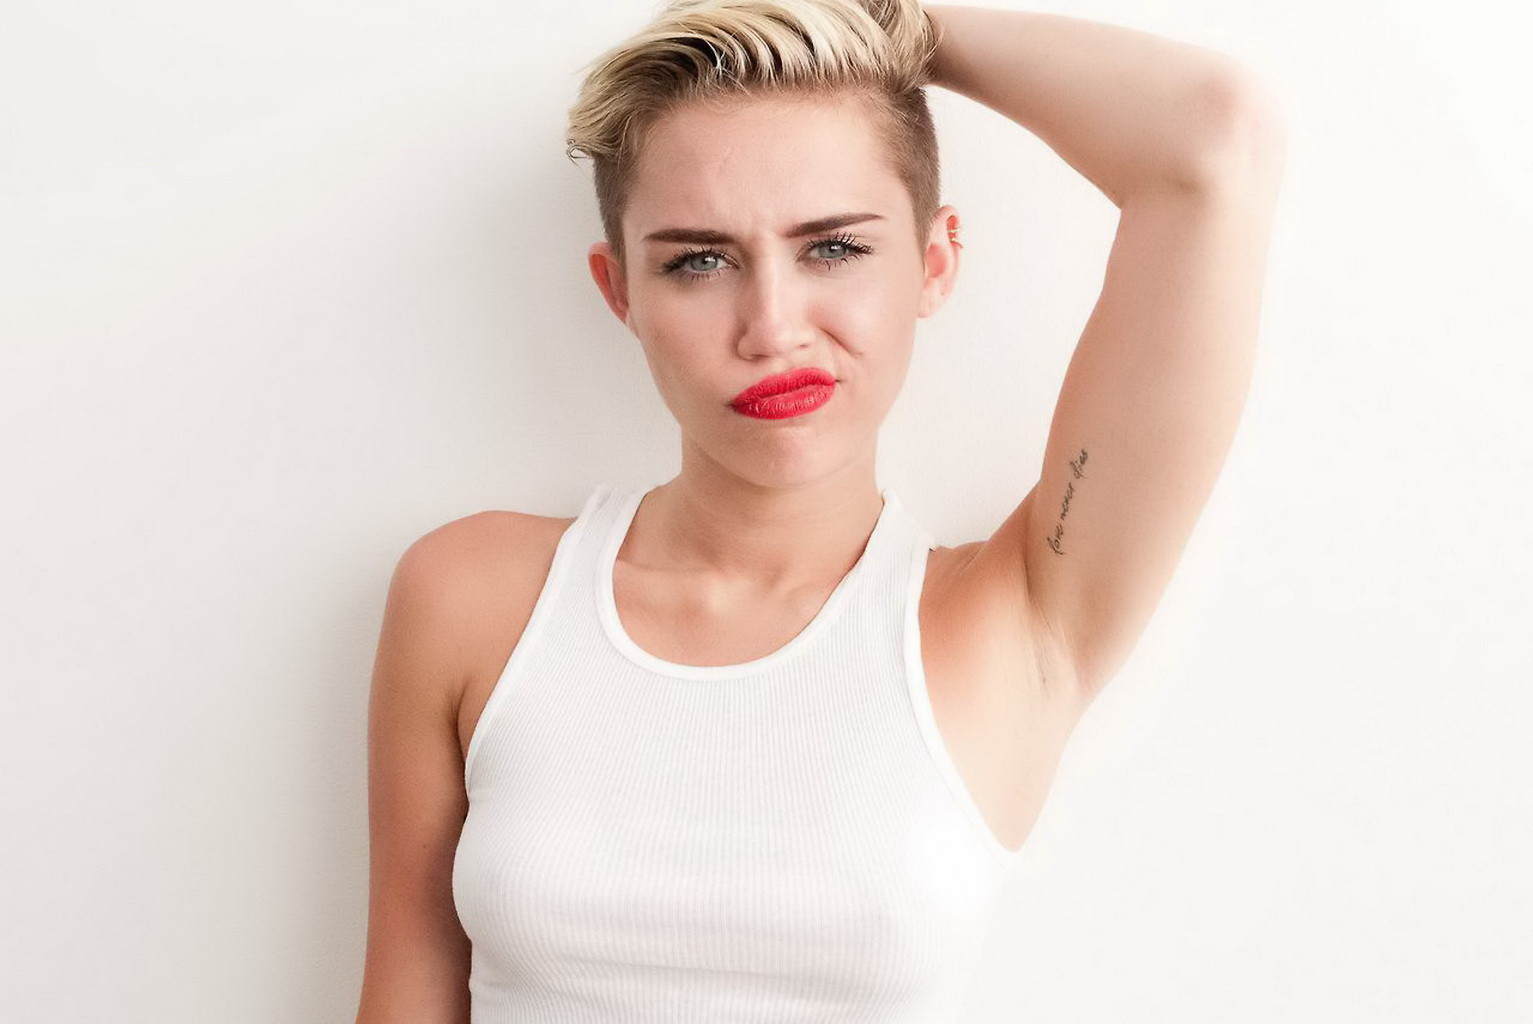 Miley Cyrus shows off her fully naked body while filming Wrecking Ball music vid #75219441